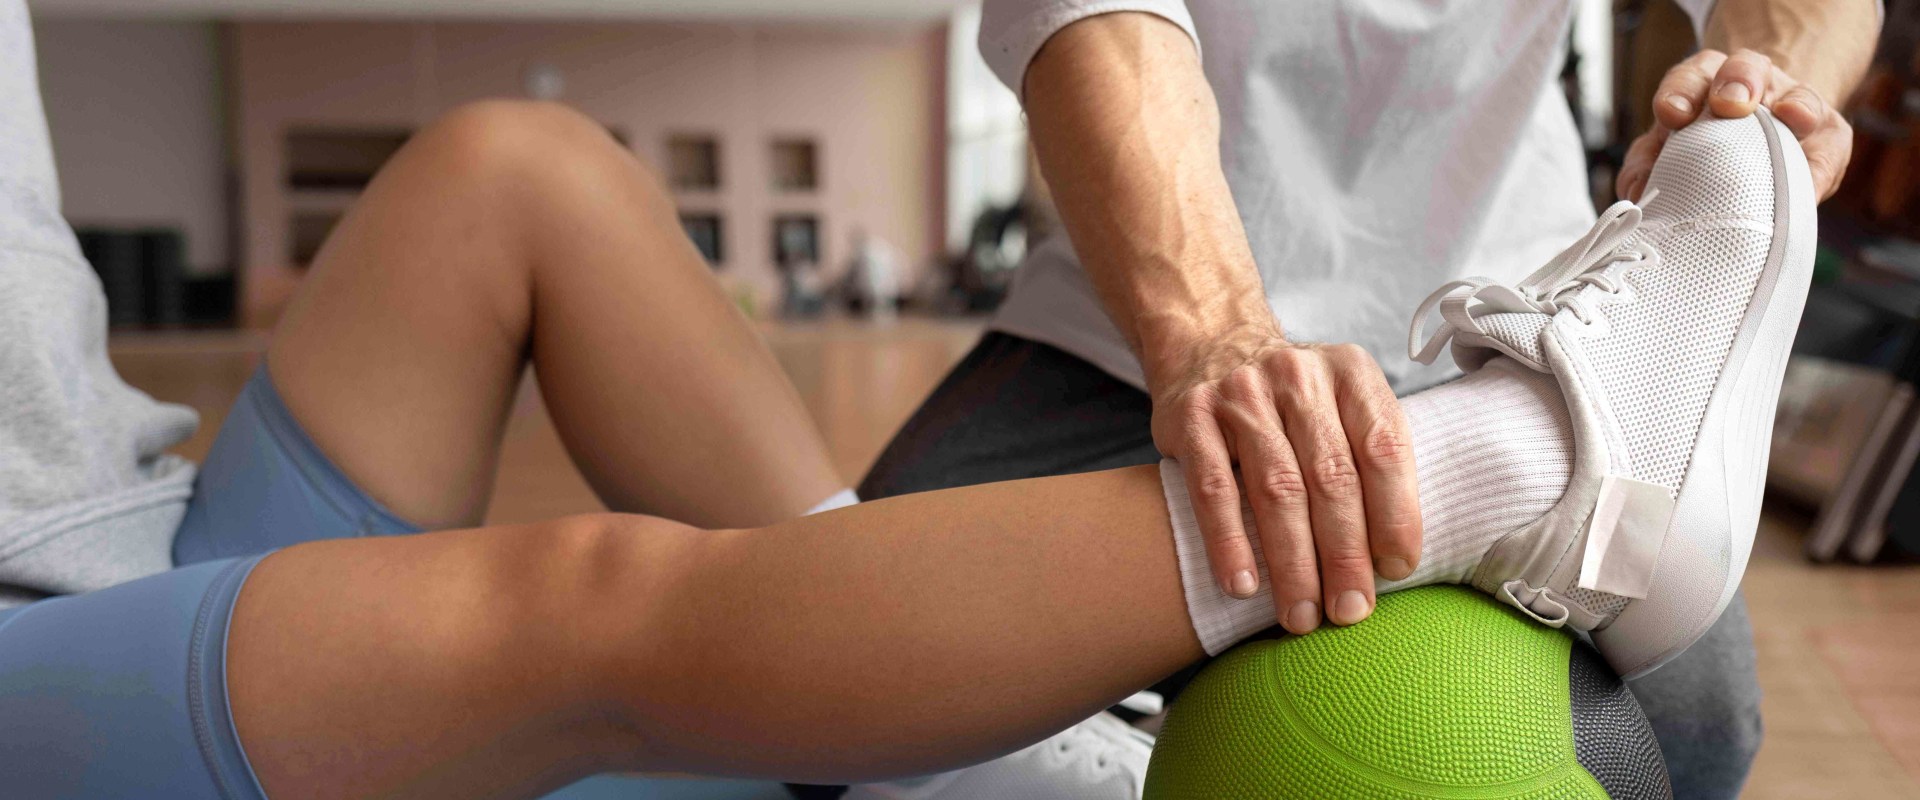 How Physical Therapy Can Help You Recover from Injury